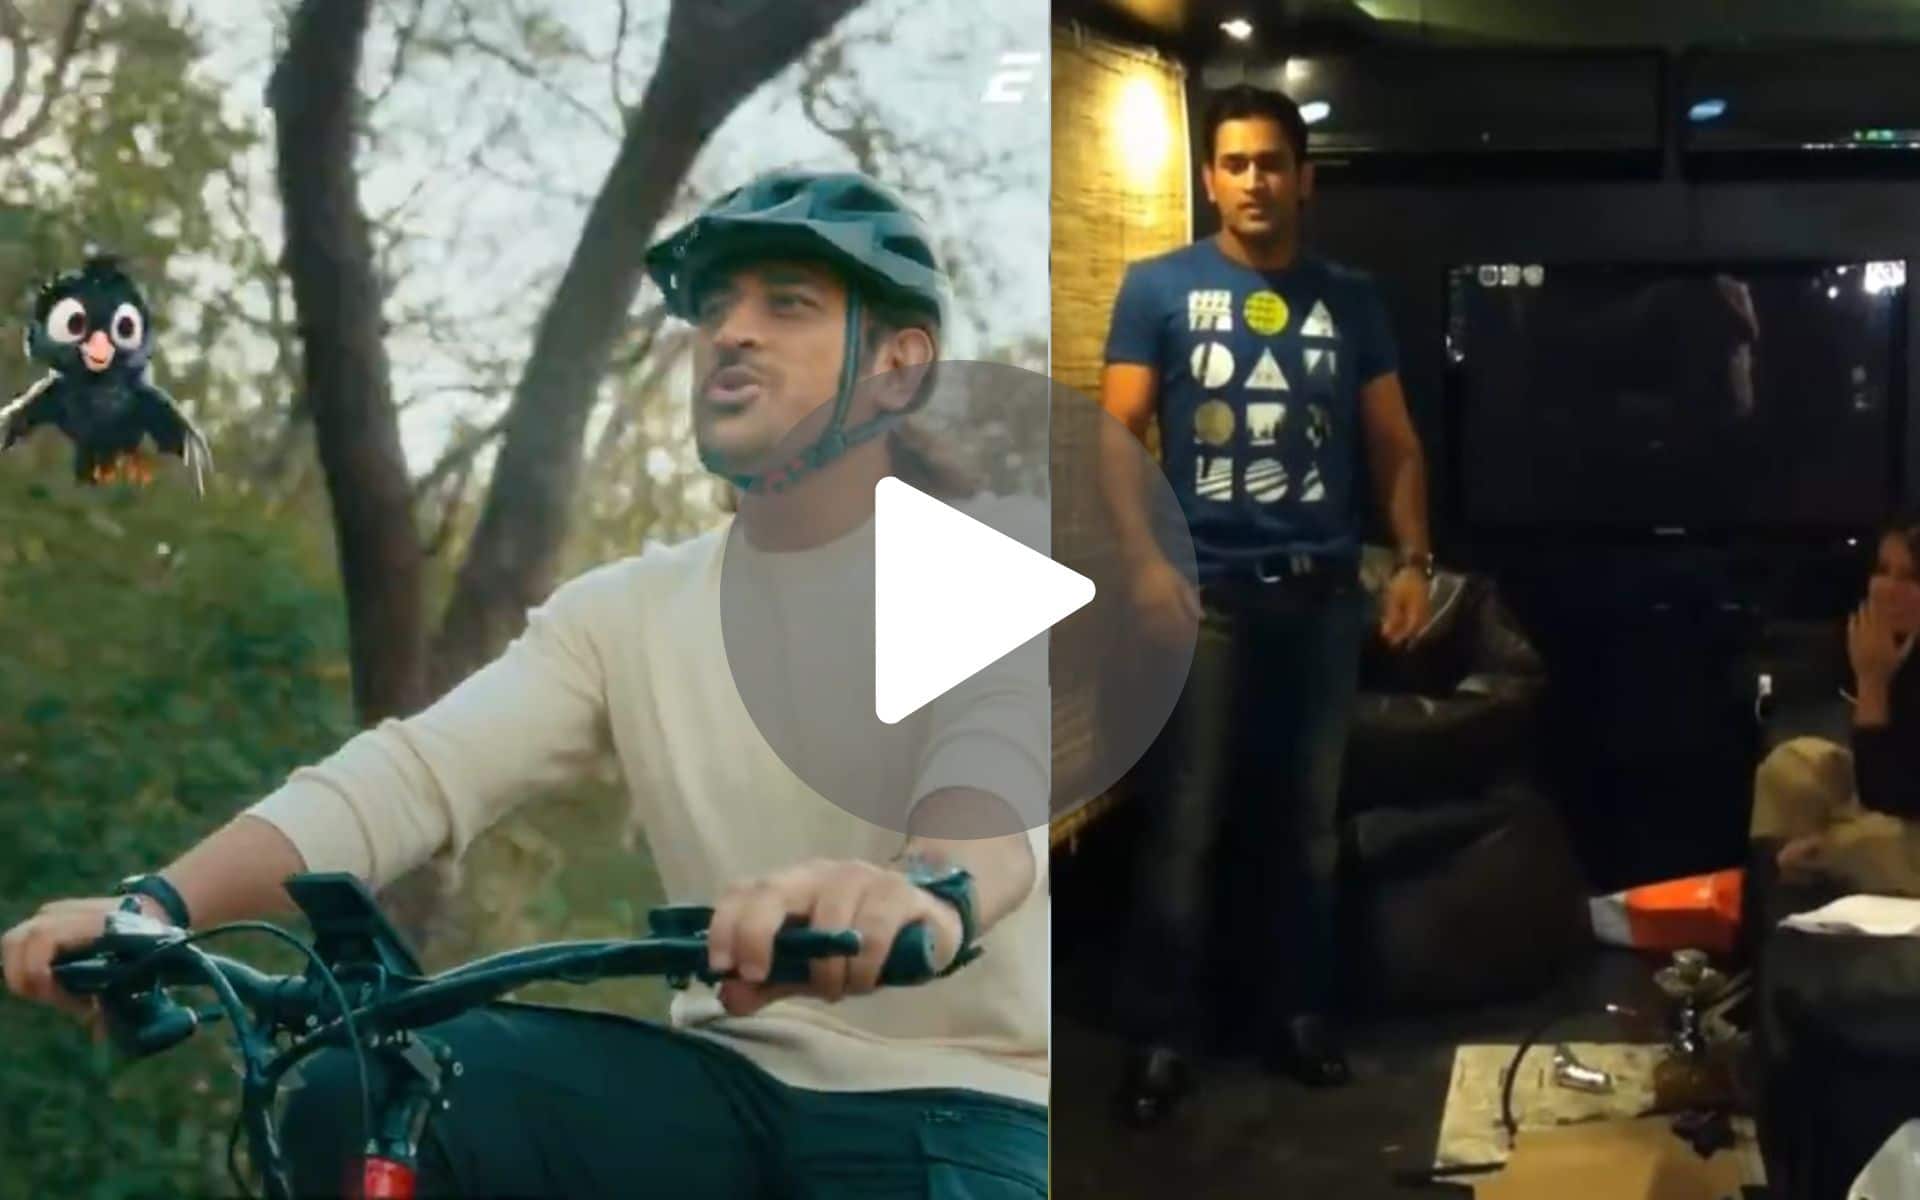 [Watch] 'Bole Jo Koyal' - MS Dhoni Showcases 'Singing' Ability In A Viral Video